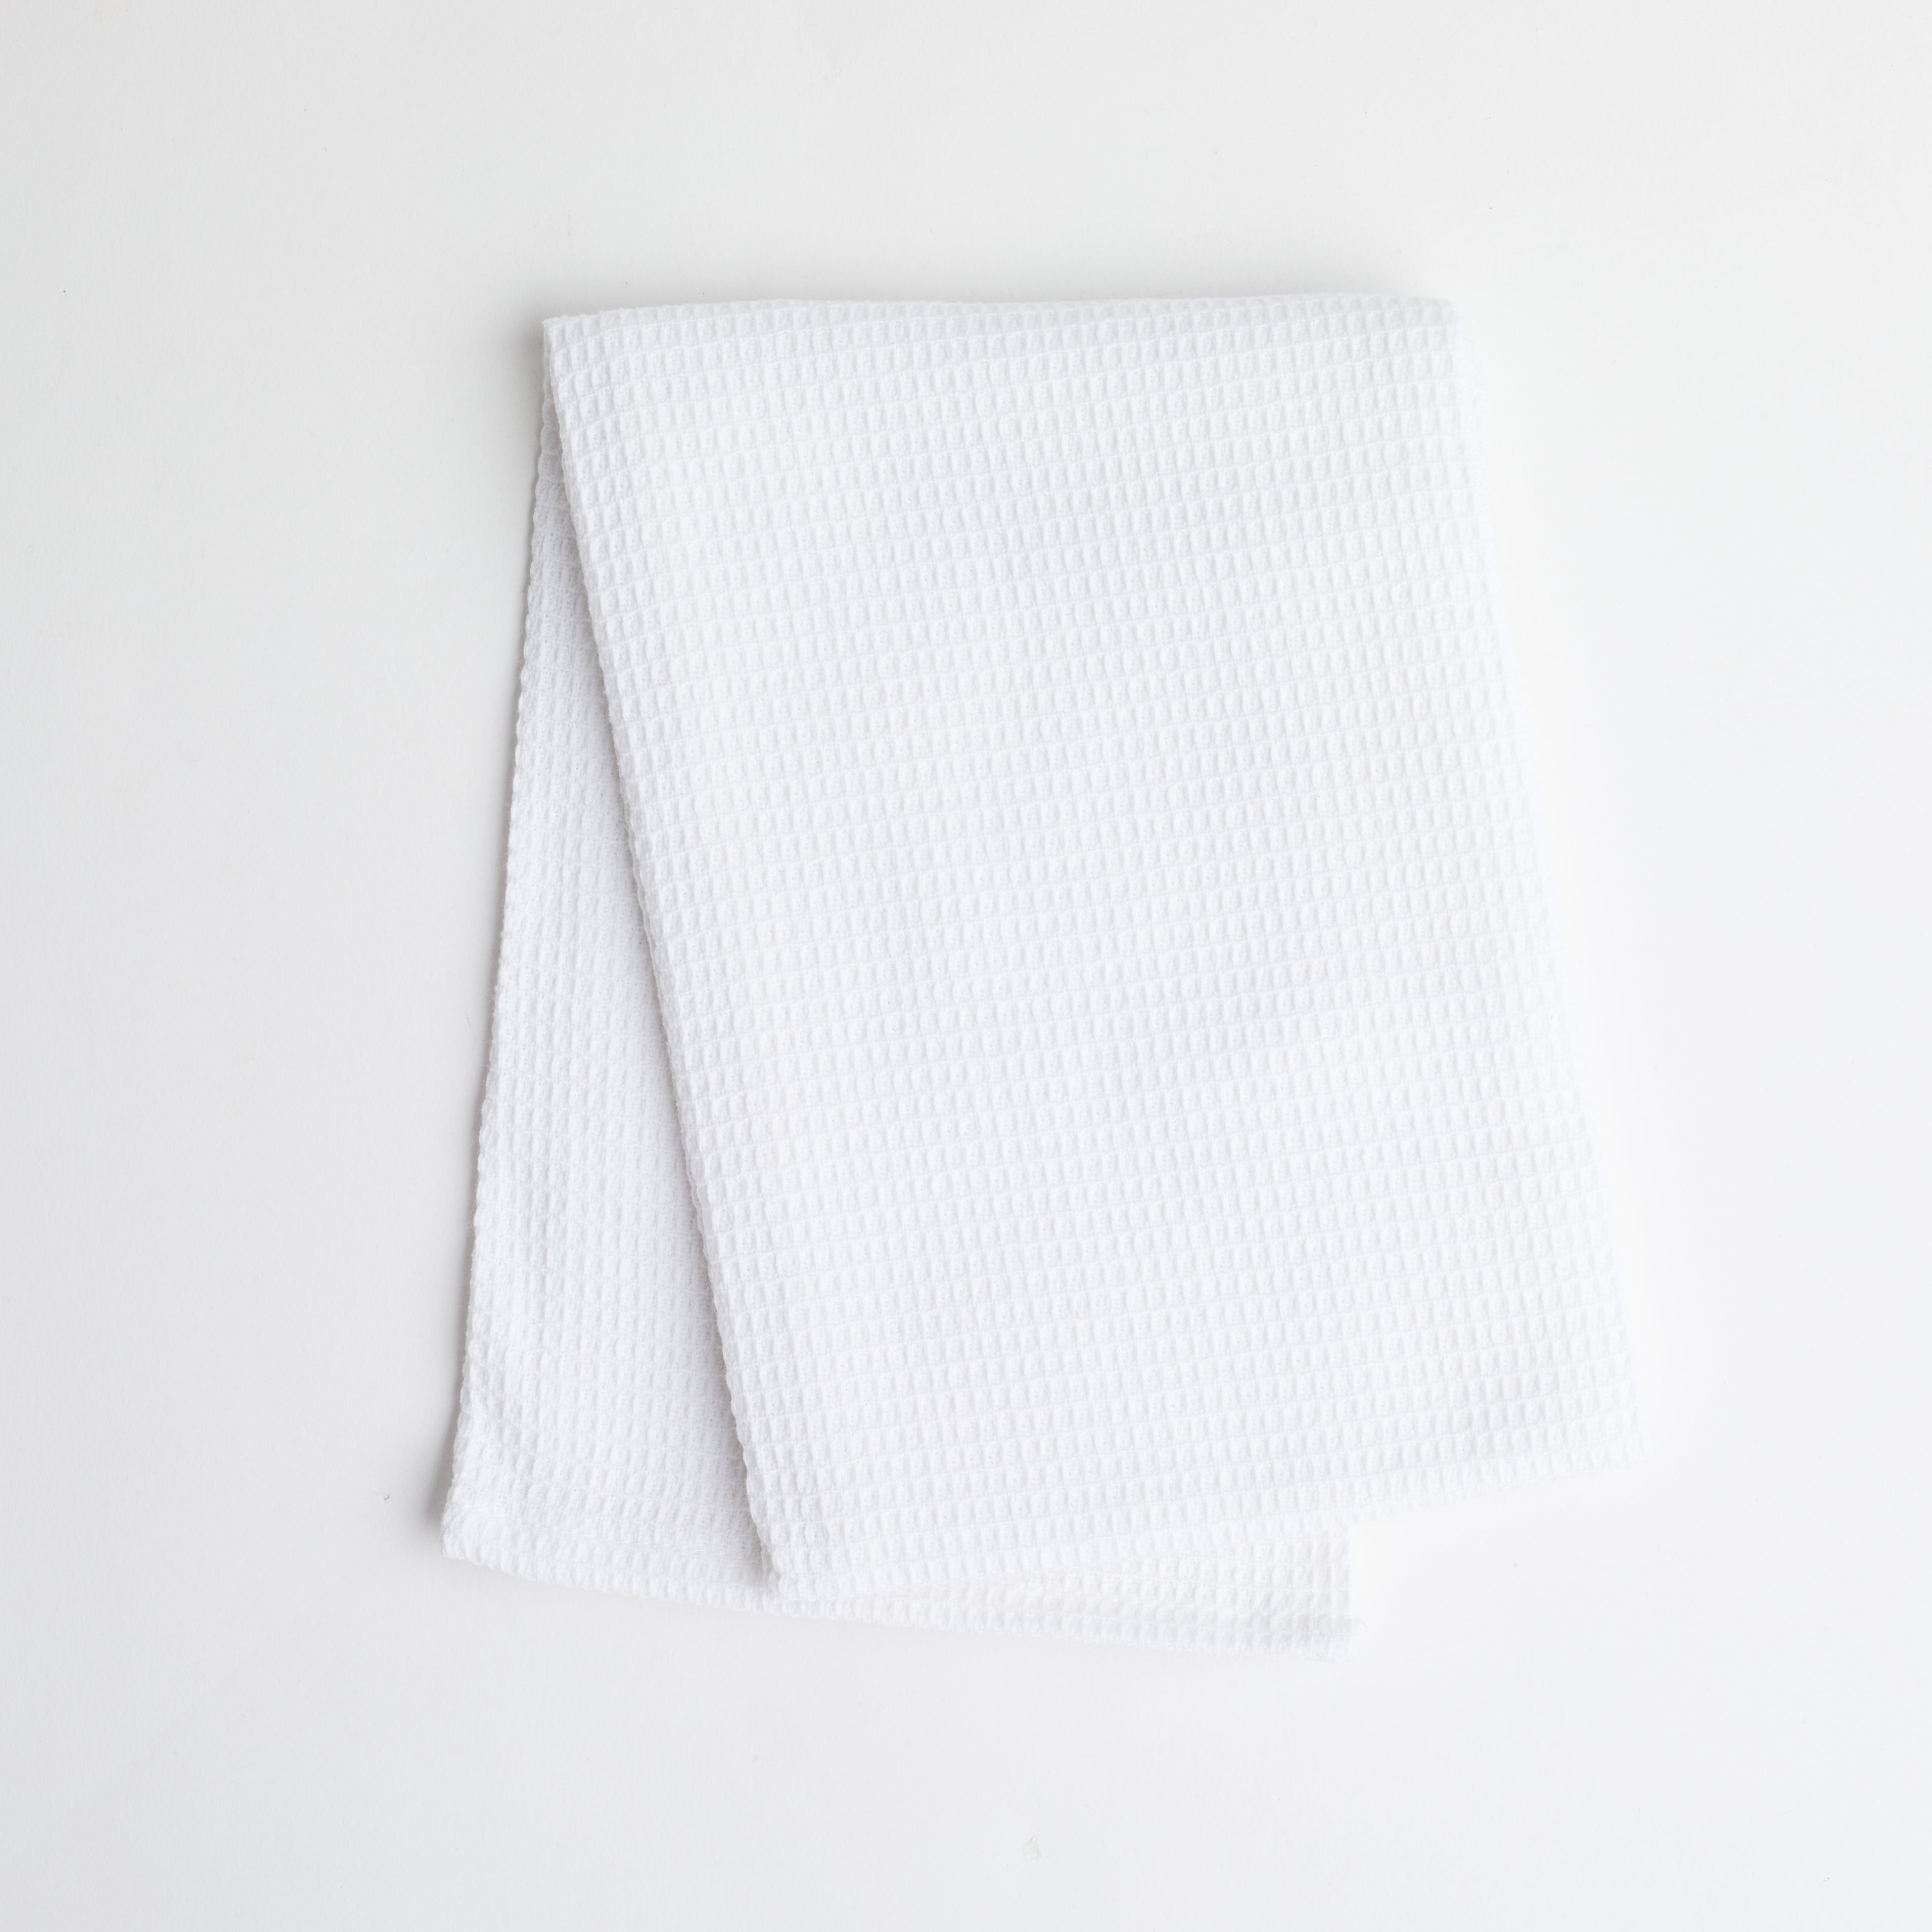 A white colored waffle knit dish towel folded on a white background